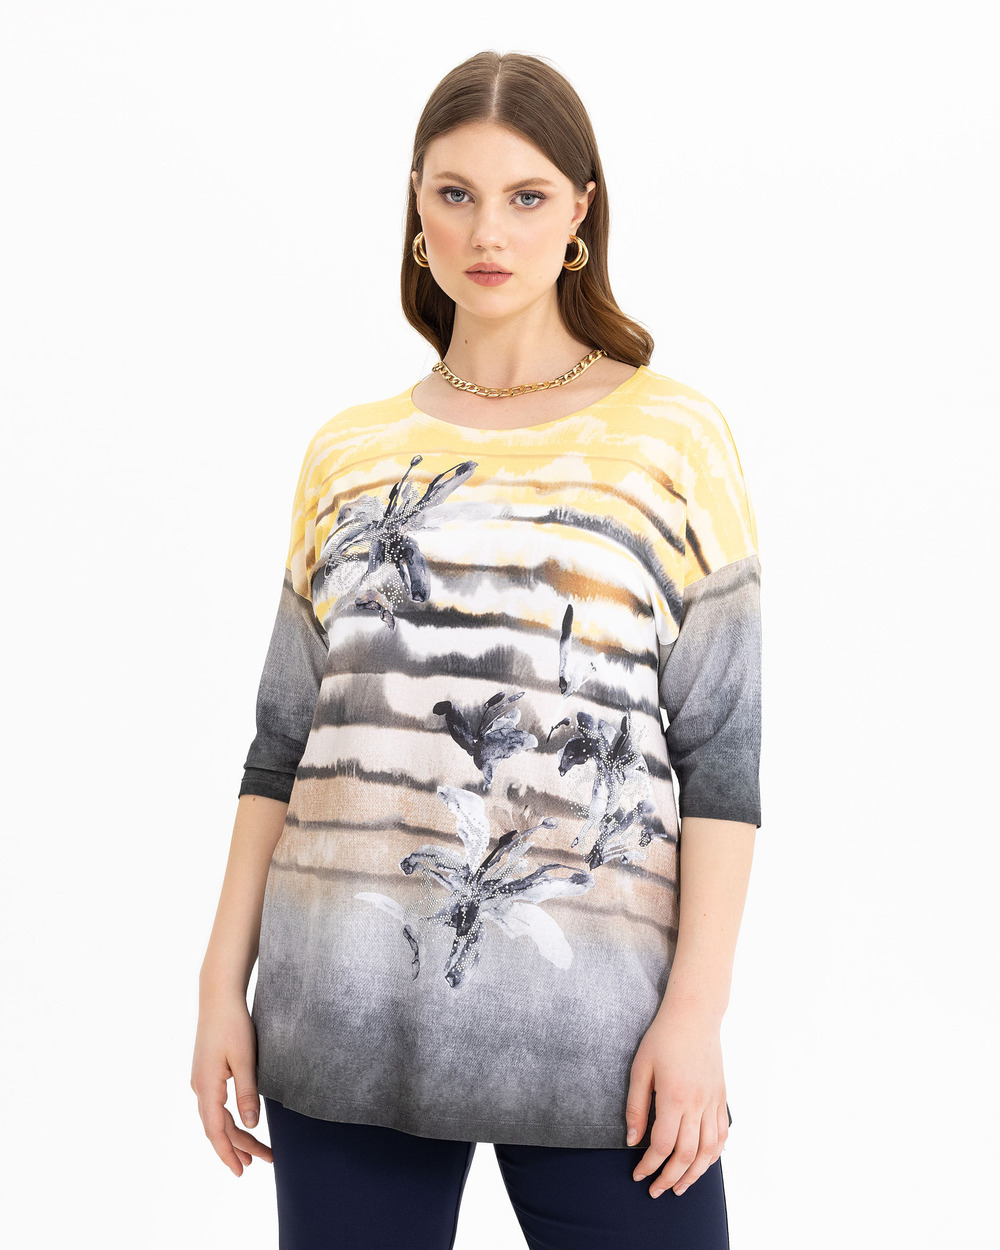  PLUS SIZE PATTERNED STONE EMBROIDERED T-SHIRT